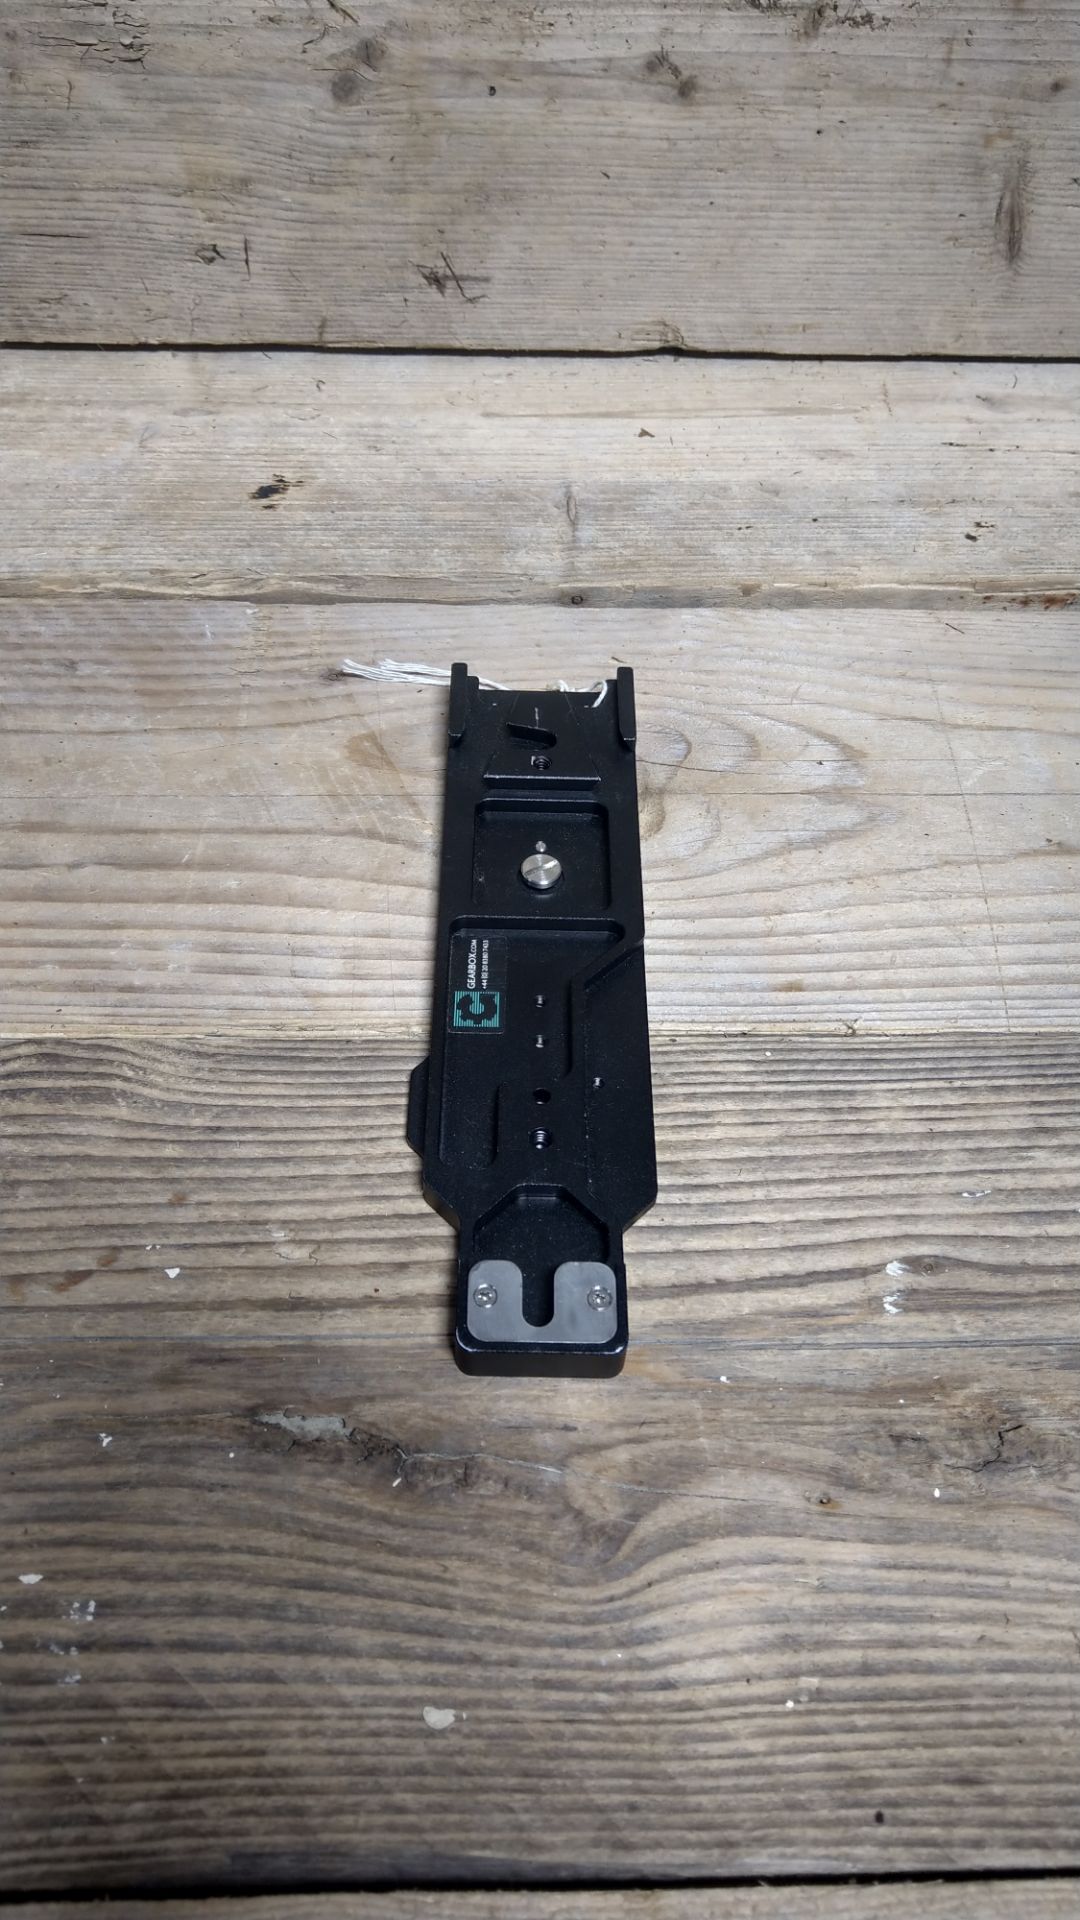 1x Slider plate for Camera - Image 2 of 2